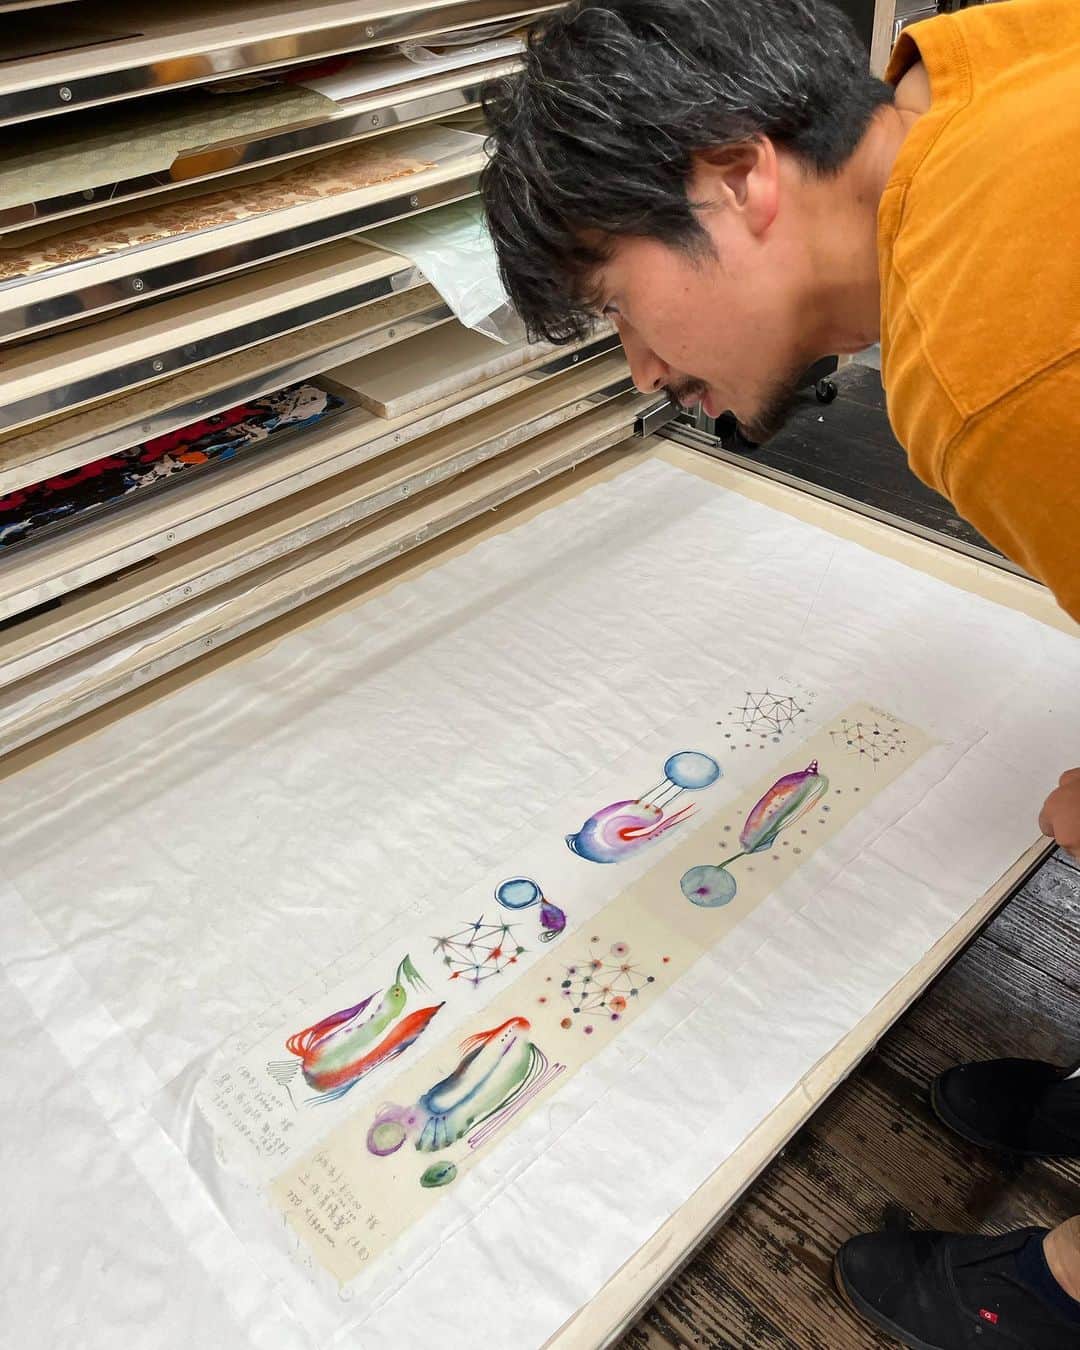 下條ユリさんのインスタグラム写真 - (下條ユリInstagram)「#表具 #scroll mounting 試作プロセス ① (日本語↓) test  There were several challenges to mount my painting as the scroll, which I had been dreaming of.  I primarily work on washi Japanese papers because I love their various characteristics and textures. I especially love to work on thick, sturdy ones with a strong presence—however, this time, I had to work on thin papers that could be rolled up.  In addition to sumi ink and Gansai Japanese watercolors, I wanted to use handmade natural ink by @torontoinkcompany mainly for "Indra's Net". We had to ensure it would not be washed with water and glue during the process.  The paper specialty @kamiji_kakimoto helped me to pick several types of paper that suited my style of expression from their selection of paper for mounting.   I worked on some drawings with and without sizing on them and brought them to the master scroll mounters @seikadou1923 They tested the mounting process carefully so I could choose the right paper based on the result.   Then, finally, I could be ready to work on the painting.  今回、念願の表装を試みるにあたって、数々のチャレンジがありました。  近年の作品はだいたい和紙に描いていますが、和紙が持つ様々な個性が好きで、特に存在感のある厚い紙を好んでいます。しかし今回は巻くことができる薄い紙に描かなけれがいけなかったこと。そしていつもの墨と顔彩だけではなく『インドラの網』では特に天然成分の手づくりインクを使ったので、裏打ちの段階で絵の具が流れないかどうか、でした。  紙司柿本さん @kamiji_kakimoto  で表具に適した紙のセレクションの中からわたしの表現の仕方に合う紙を数種類選び、にじみ留めドーサ有無と合わせて試し描きをし、そこから表具師清華堂さん @seikadou1923  に入念にテストを重ねていただいた結果、最も適した紙に作画していく準備を整えました。　  ＊  下條ユリ　 線と点と　展   Yuri Shimojo  Exhibition in Kyoto  “A line  and  a dot  and”   〜 11.26 (日)  毎週　金、土、日　 11:30-17:00 予約不要  @farmoon_kyoto  Farmoon 茶楼　 左京区北白川東久保田町九 Kyoto Japan  #表具 #表装 #掛け軸  #scrollpainting」11月18日 11時23分 - yurishimojo